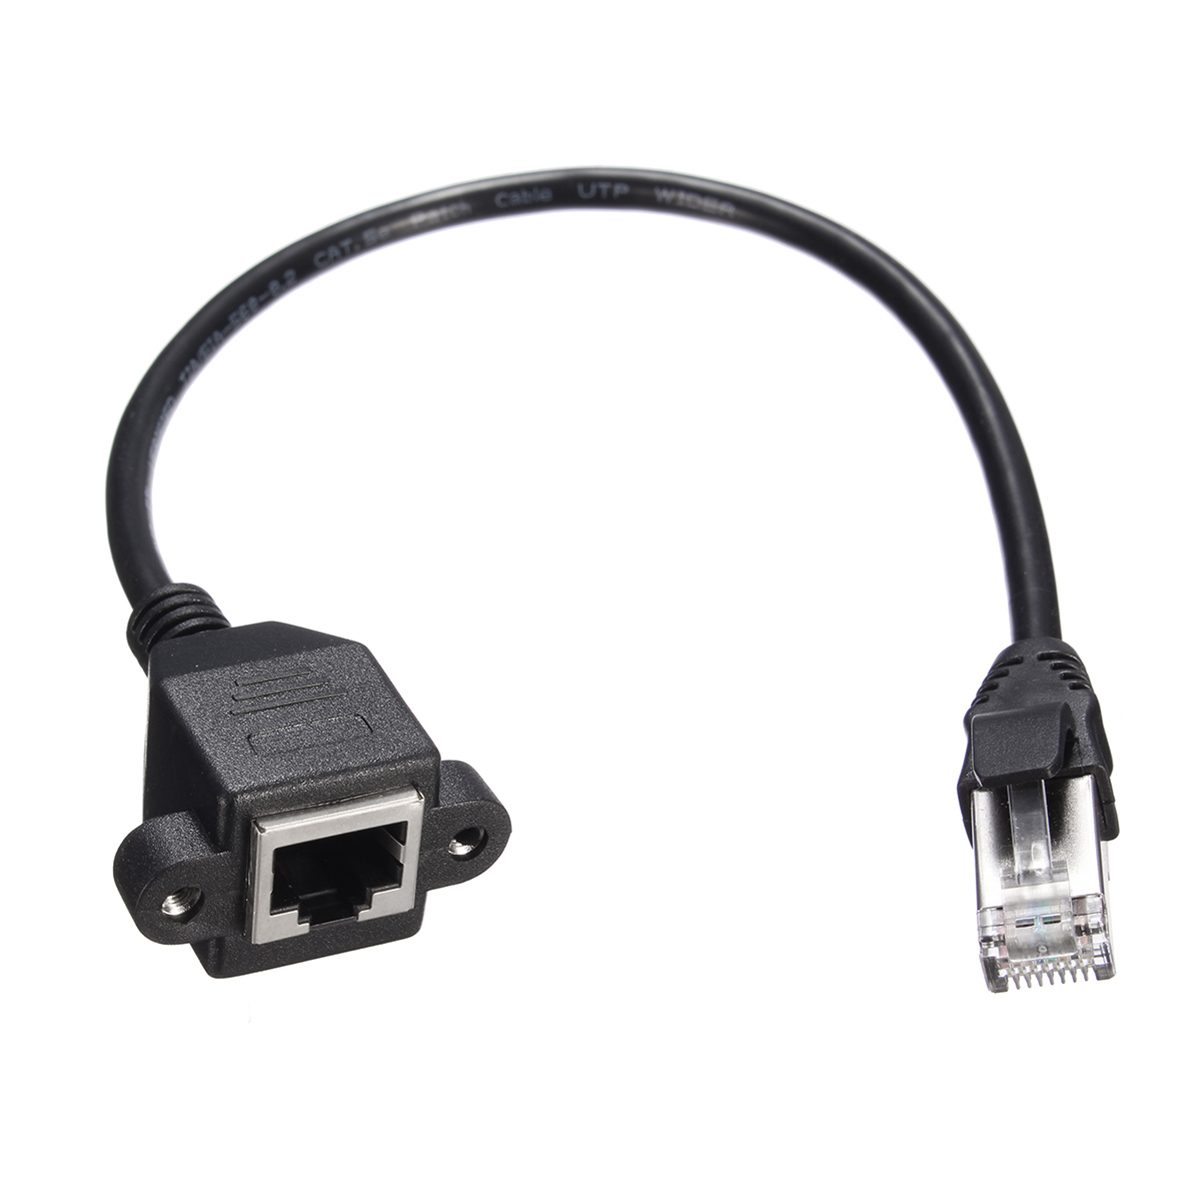 30cm/1M RJ45 Cable Male to Female Screw Panel Mount Ethernet LAN Network Extension Cable 74